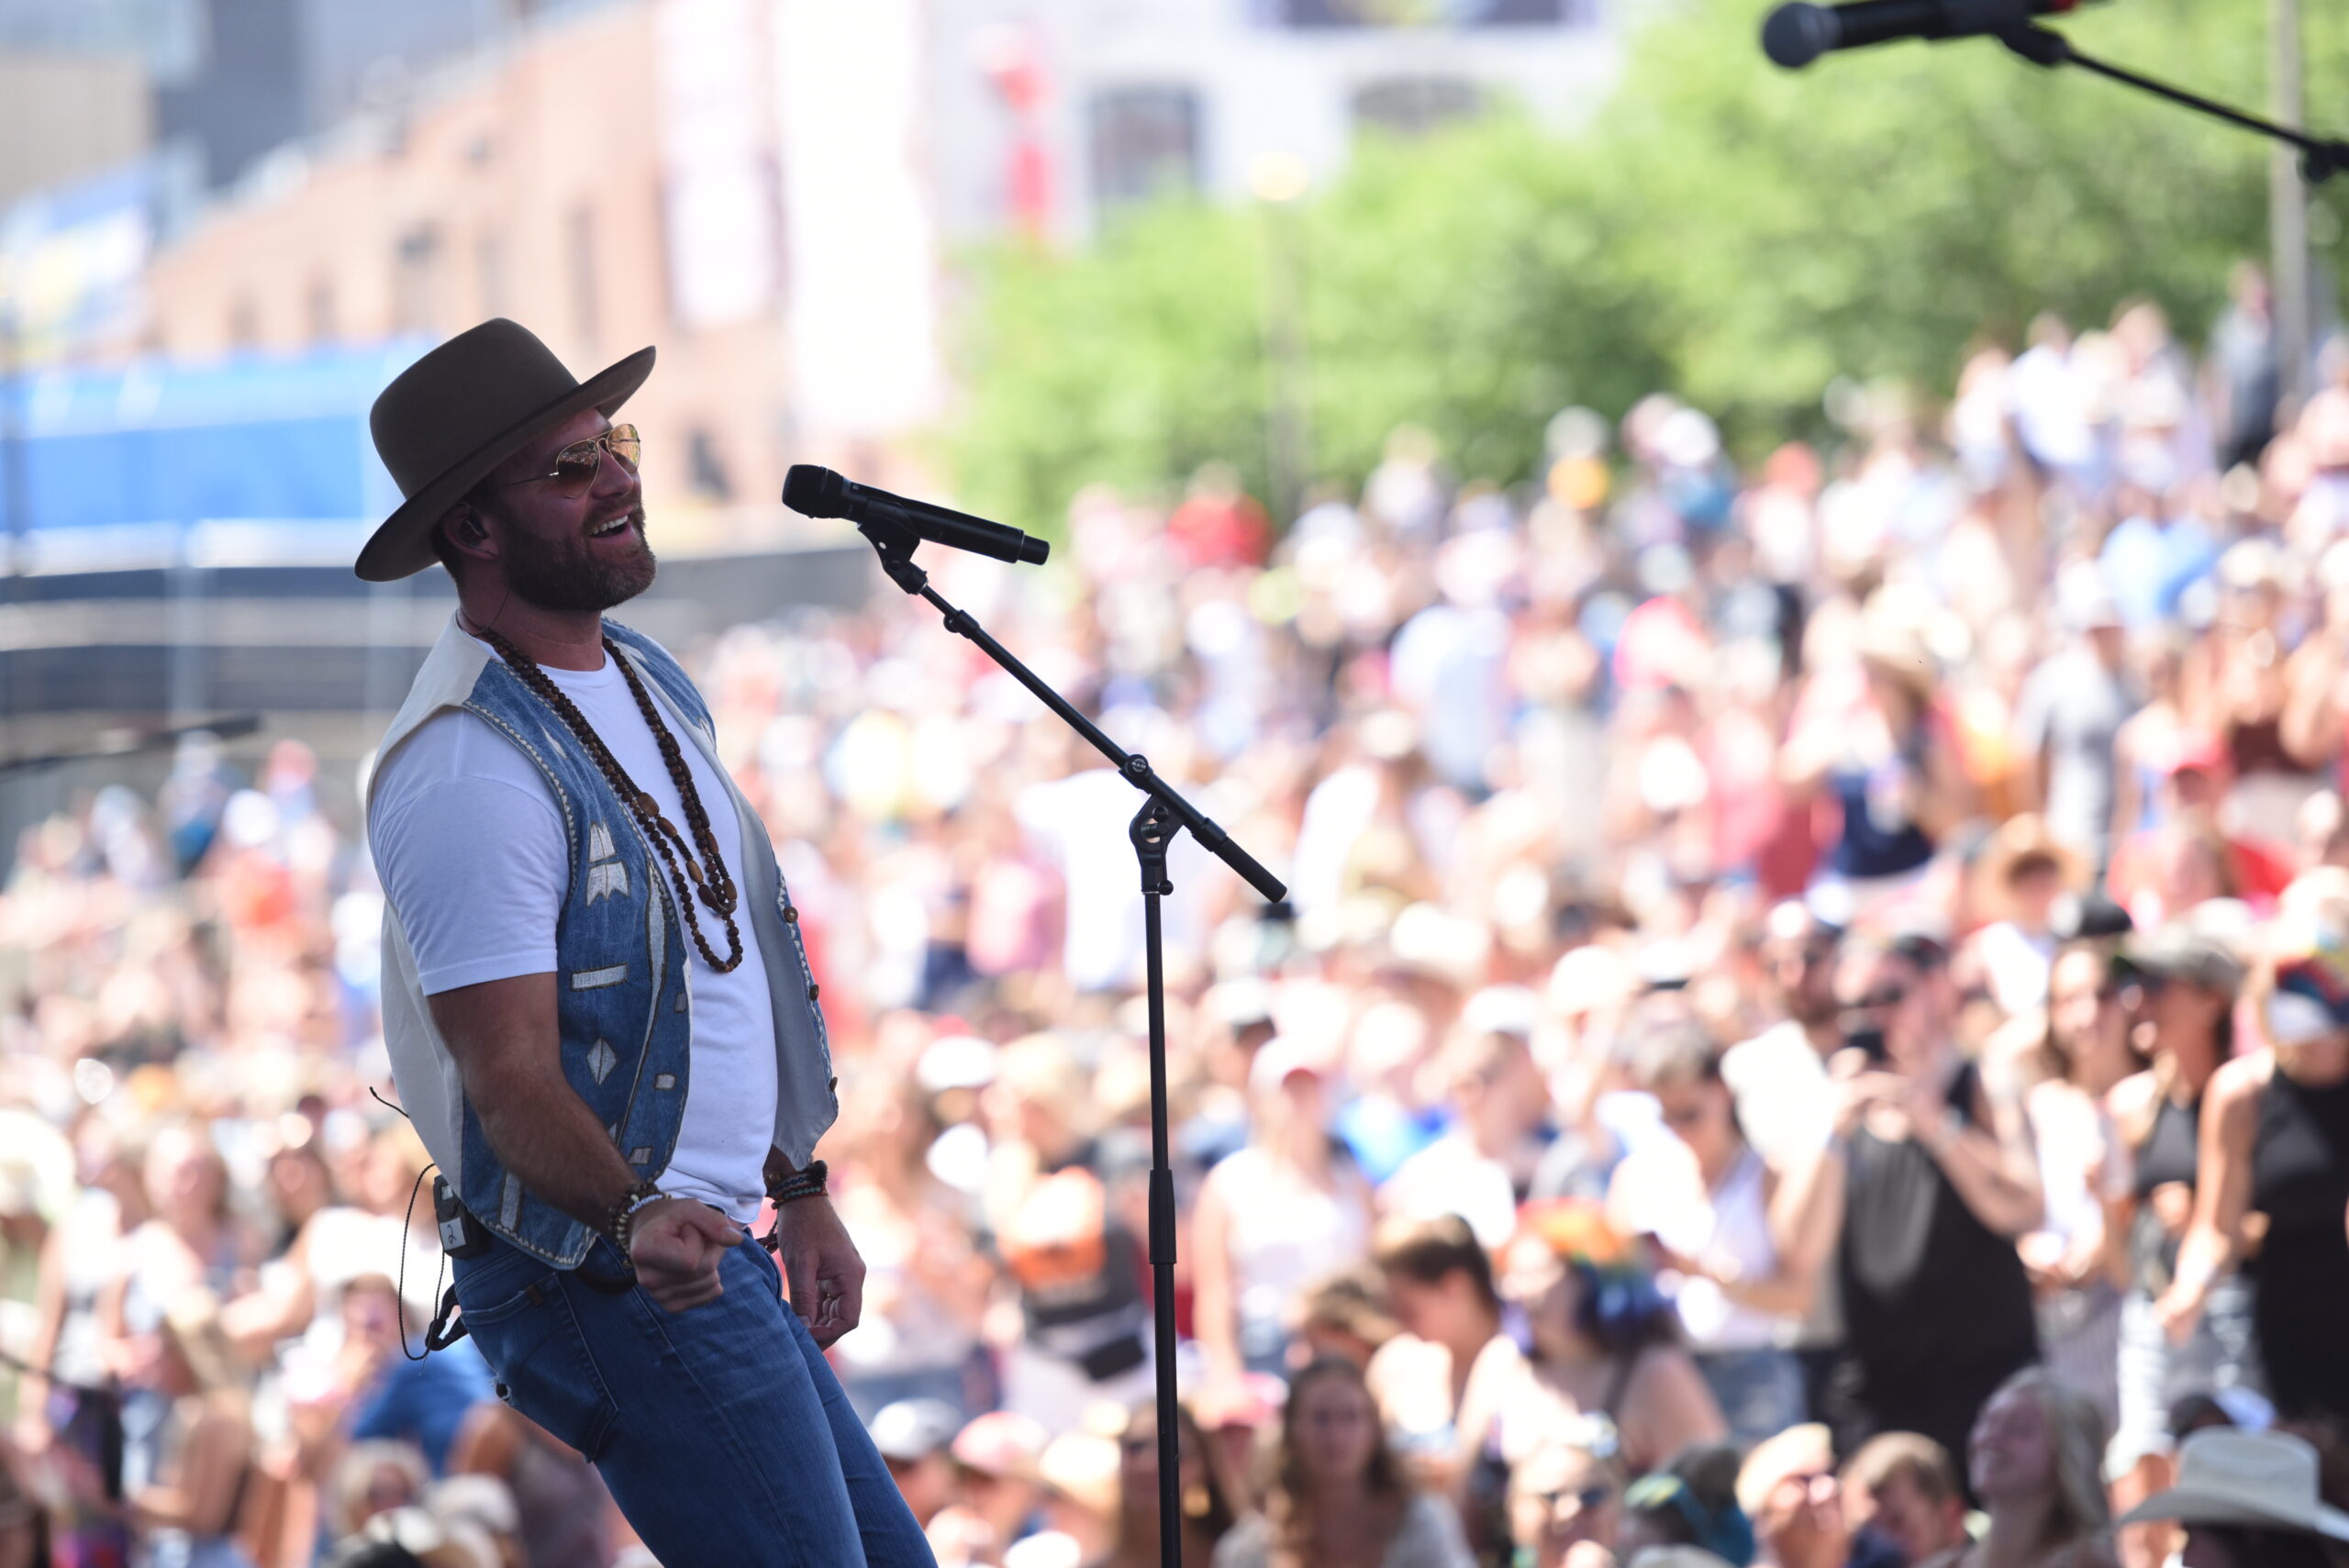 Drake White is Letting Go and Living Life – How He Overcame Partial Paralysis and Got Back on the Stage